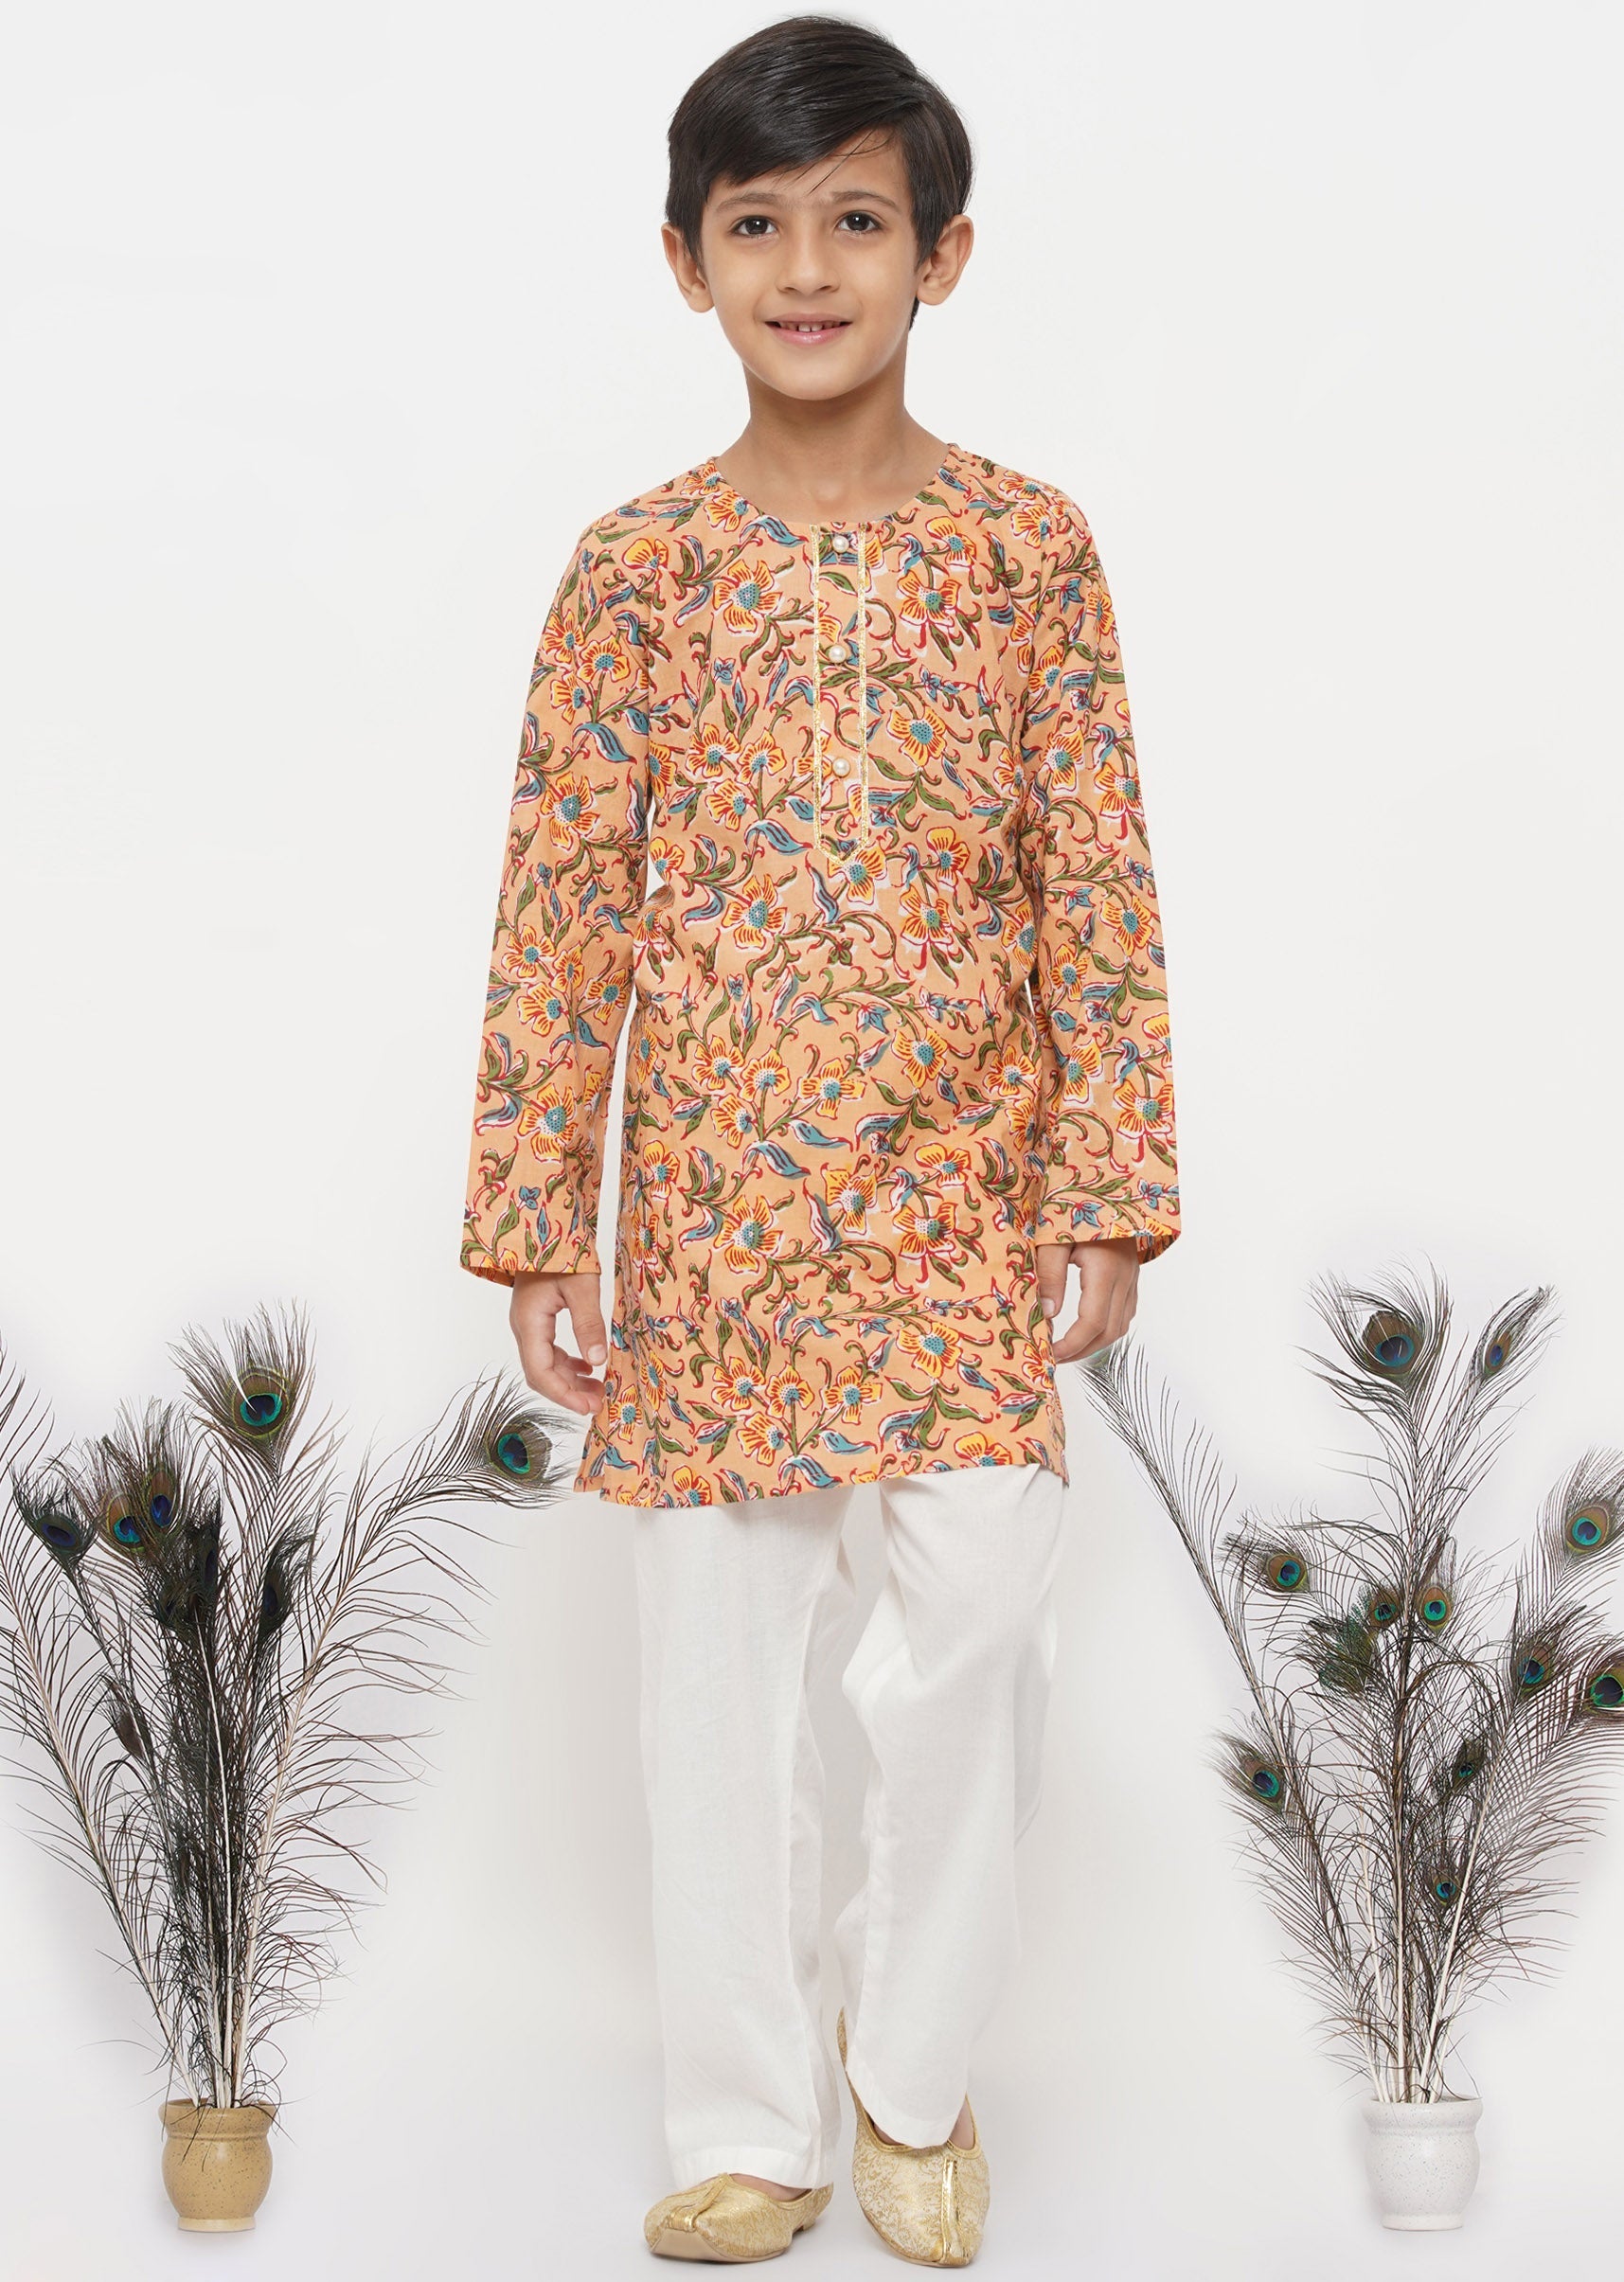 Boy's Cotton Block Print Floral Kurta With Pearl Buttons And Pyjama In Orange And Cream - Little Bansi Boys